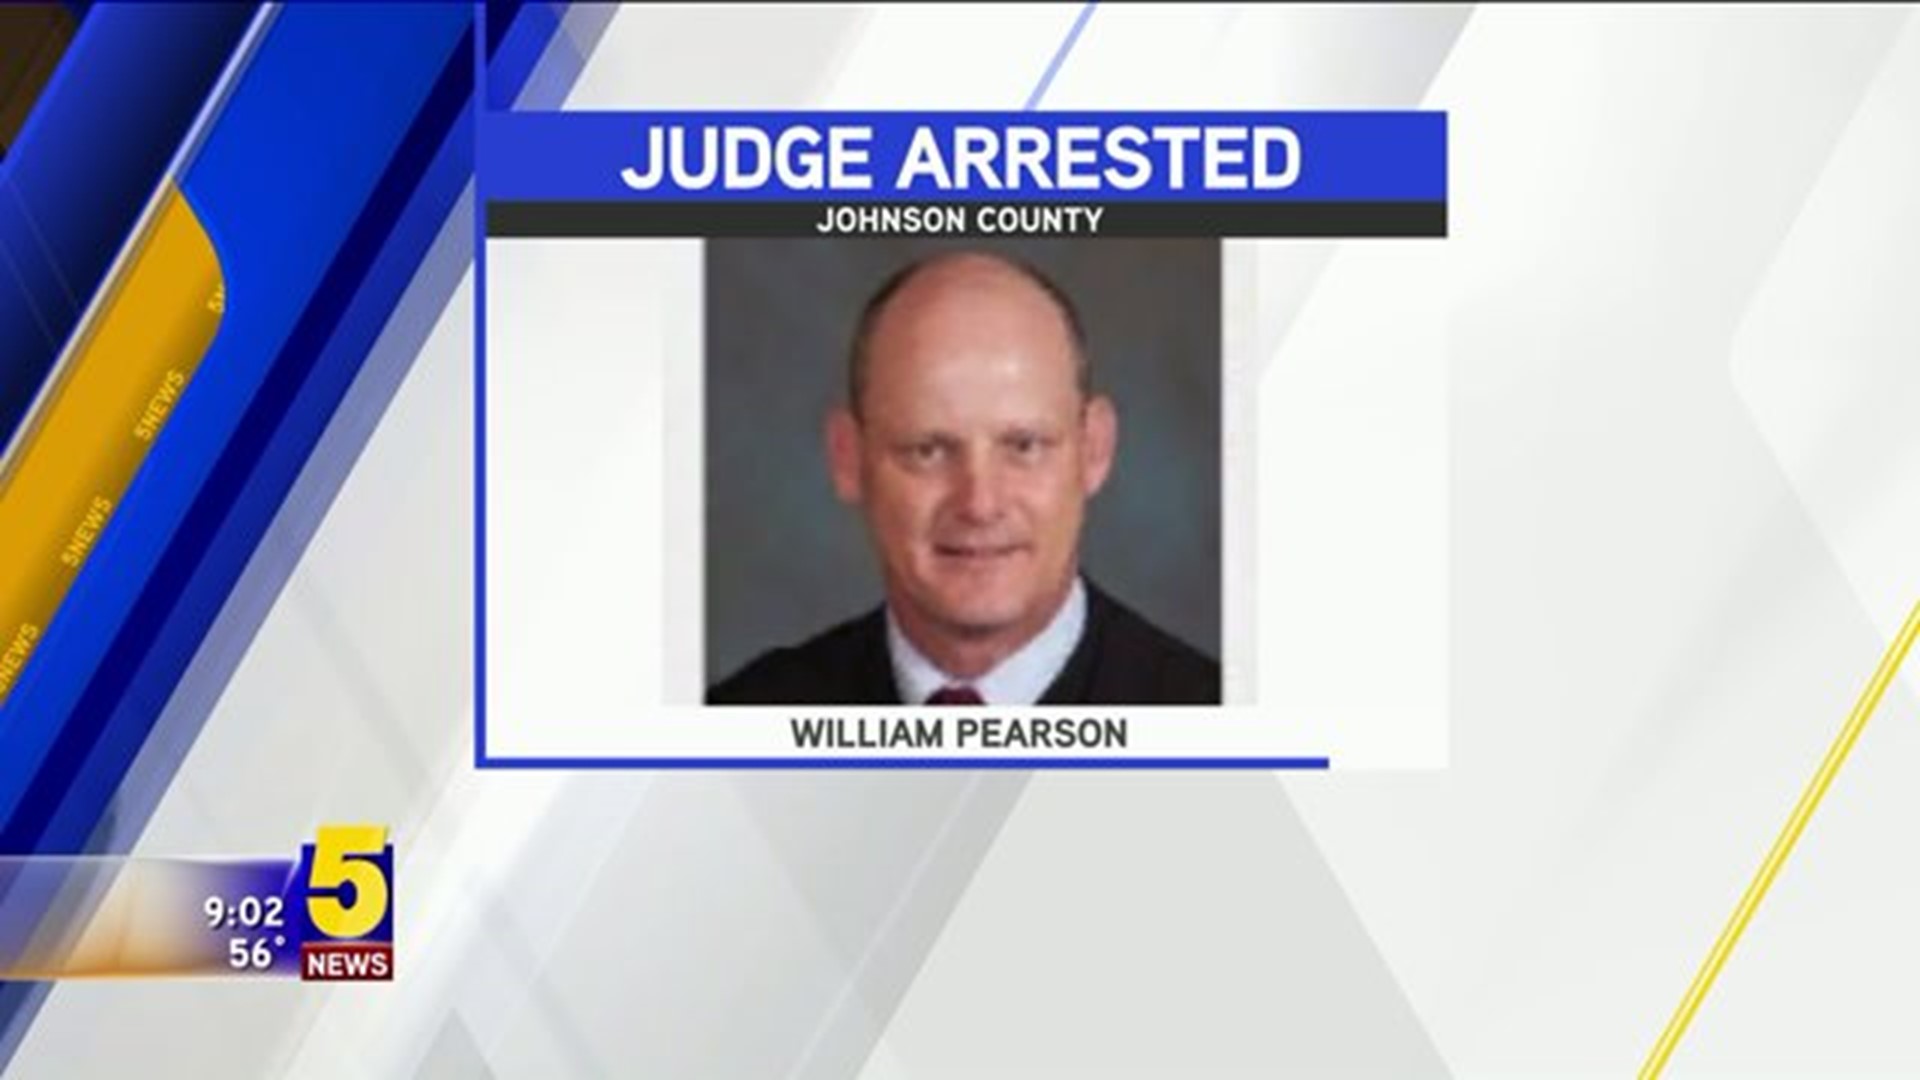 Johnson County Judge Arrested For DWI And Other Charges 5newsonline com